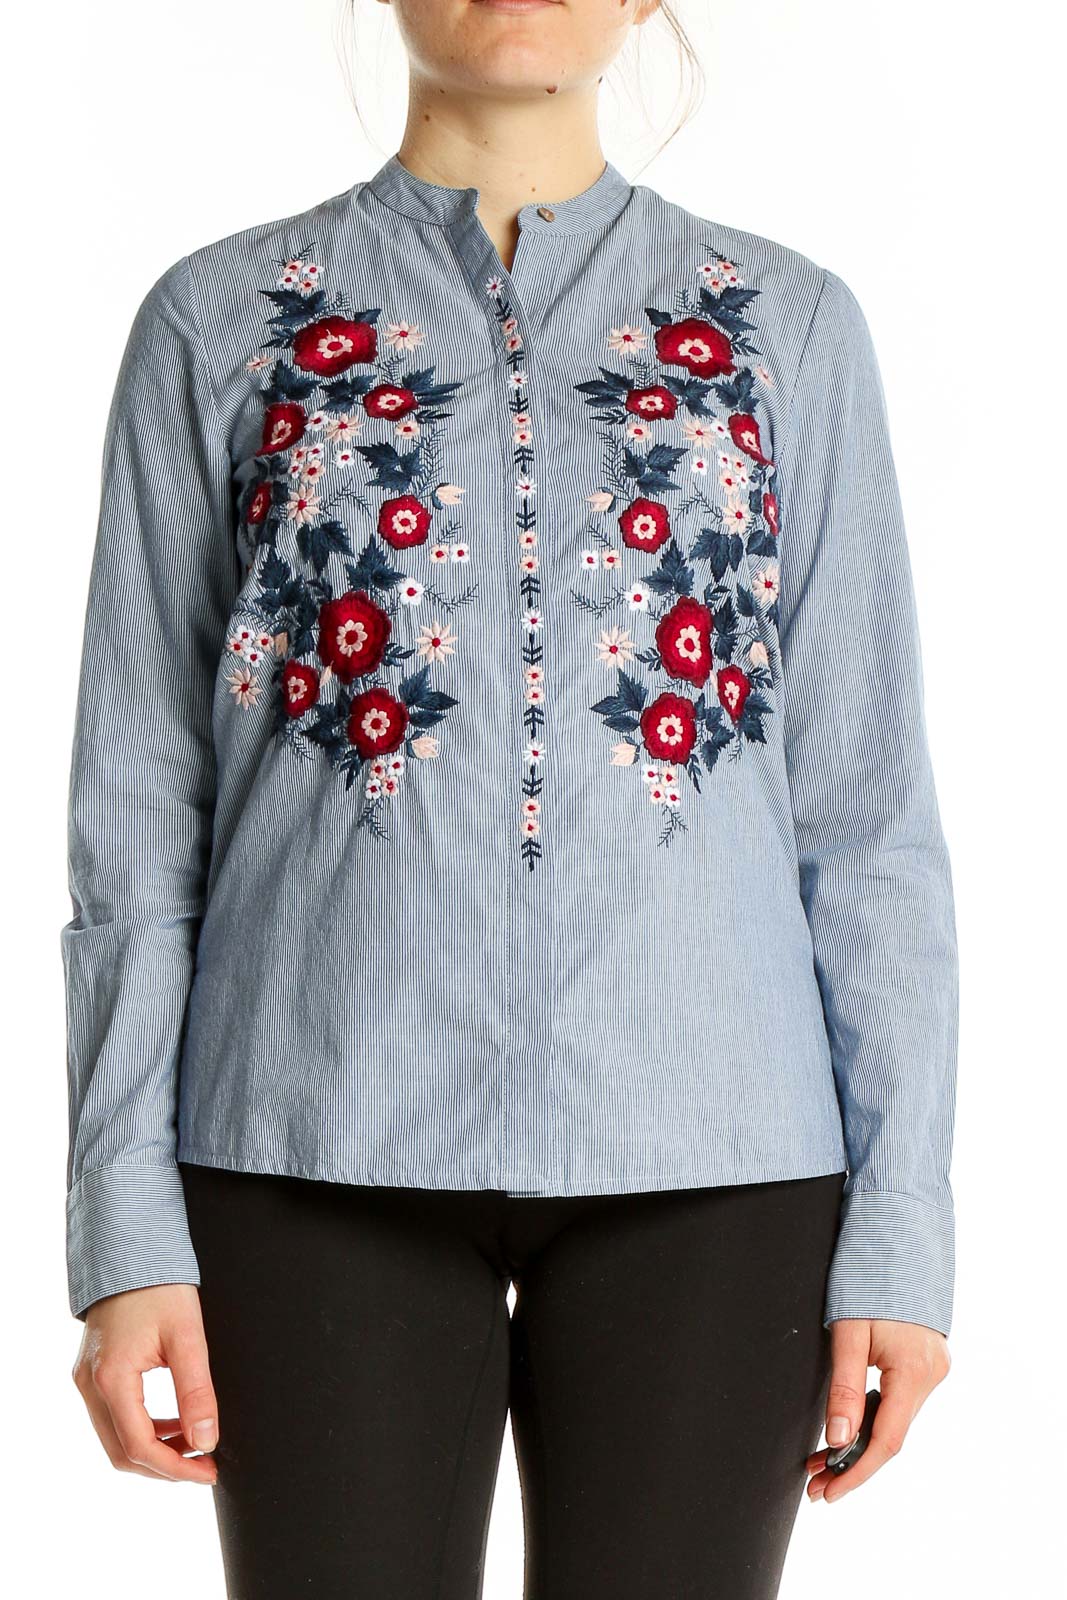 Blue Long Sleeve Pinstripe Floral Shirt Front